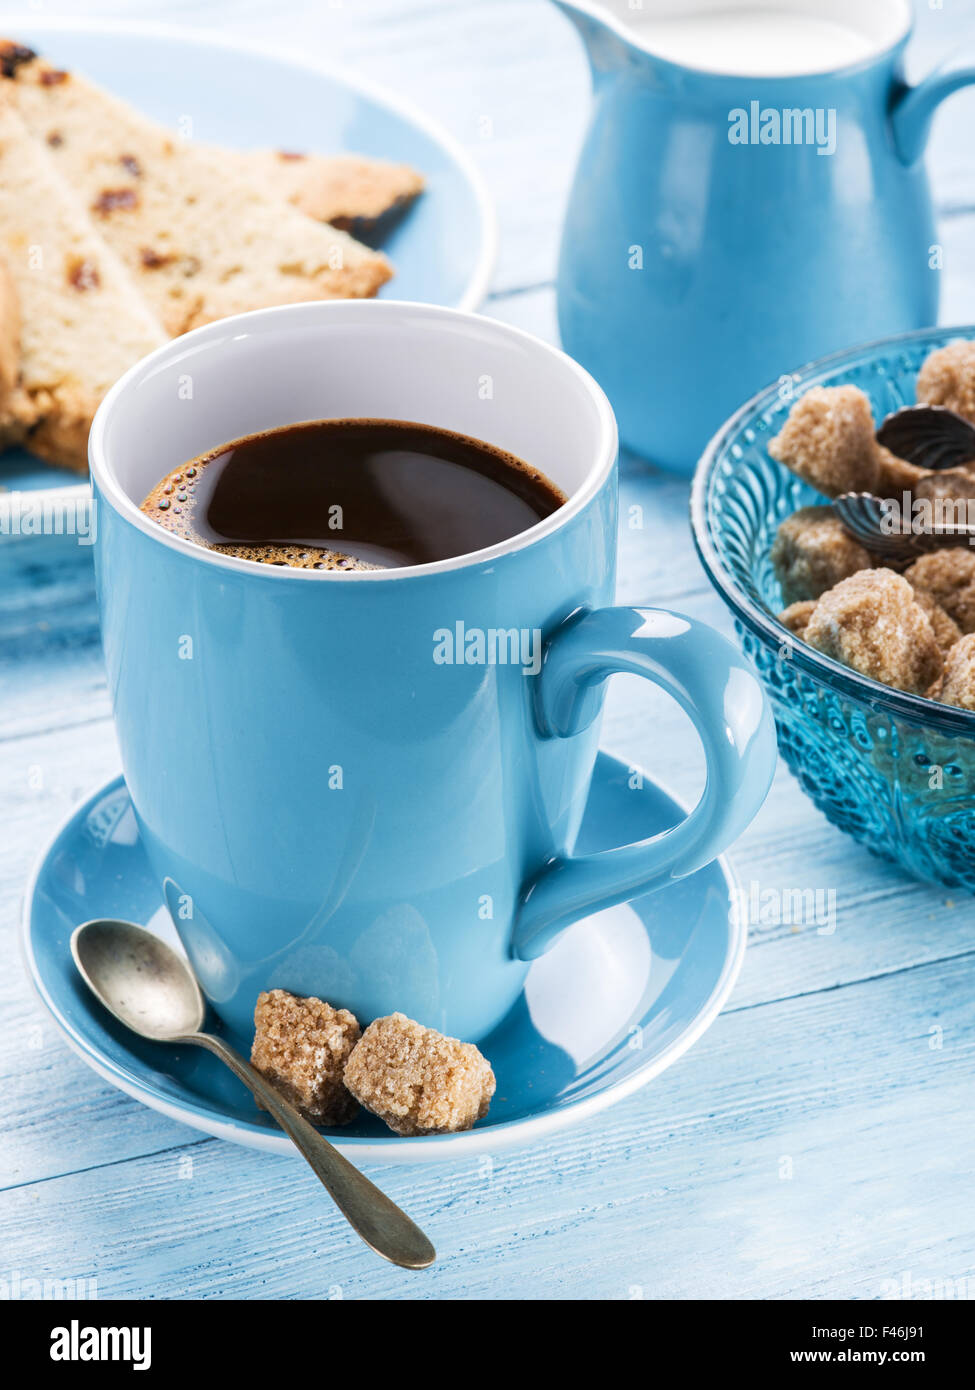 Cup of coffee, milk jug, cane sugar cubes and fruit-cake on old blue wooden table. Stock Photo